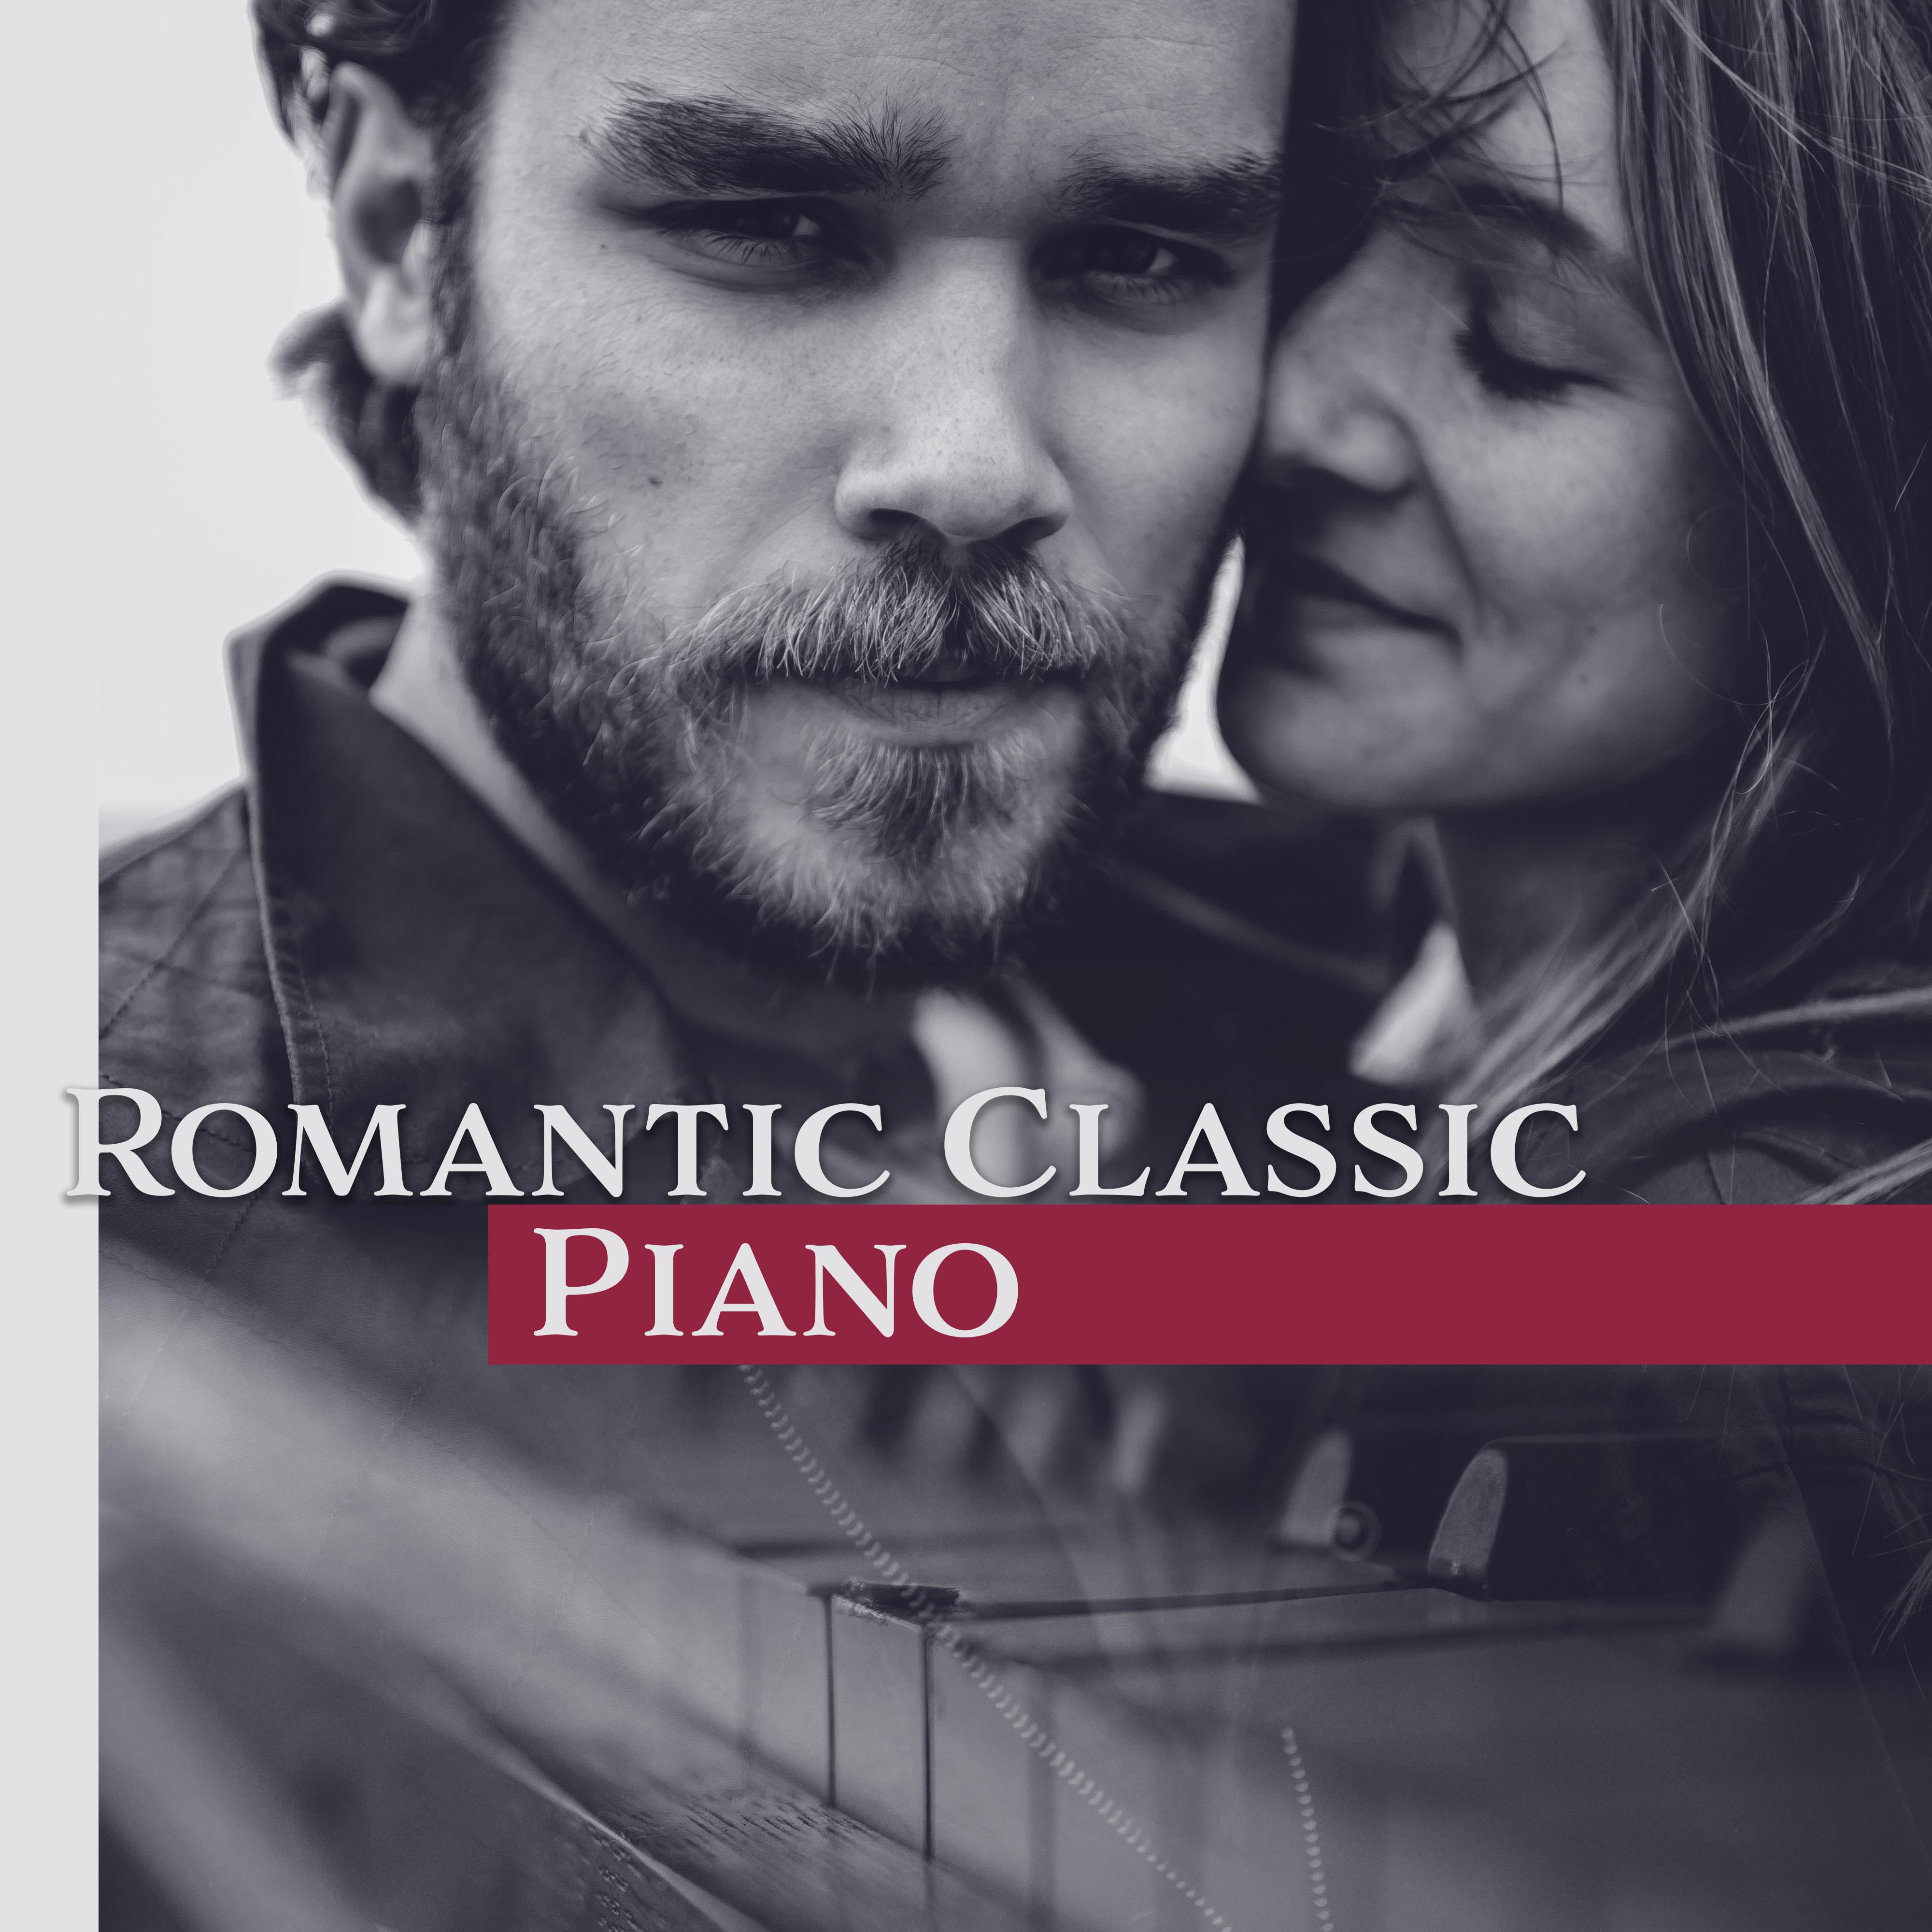 Romantic Classic Piano – Classic Music, Background for Dinner, Romantic Piano, Family Dinner